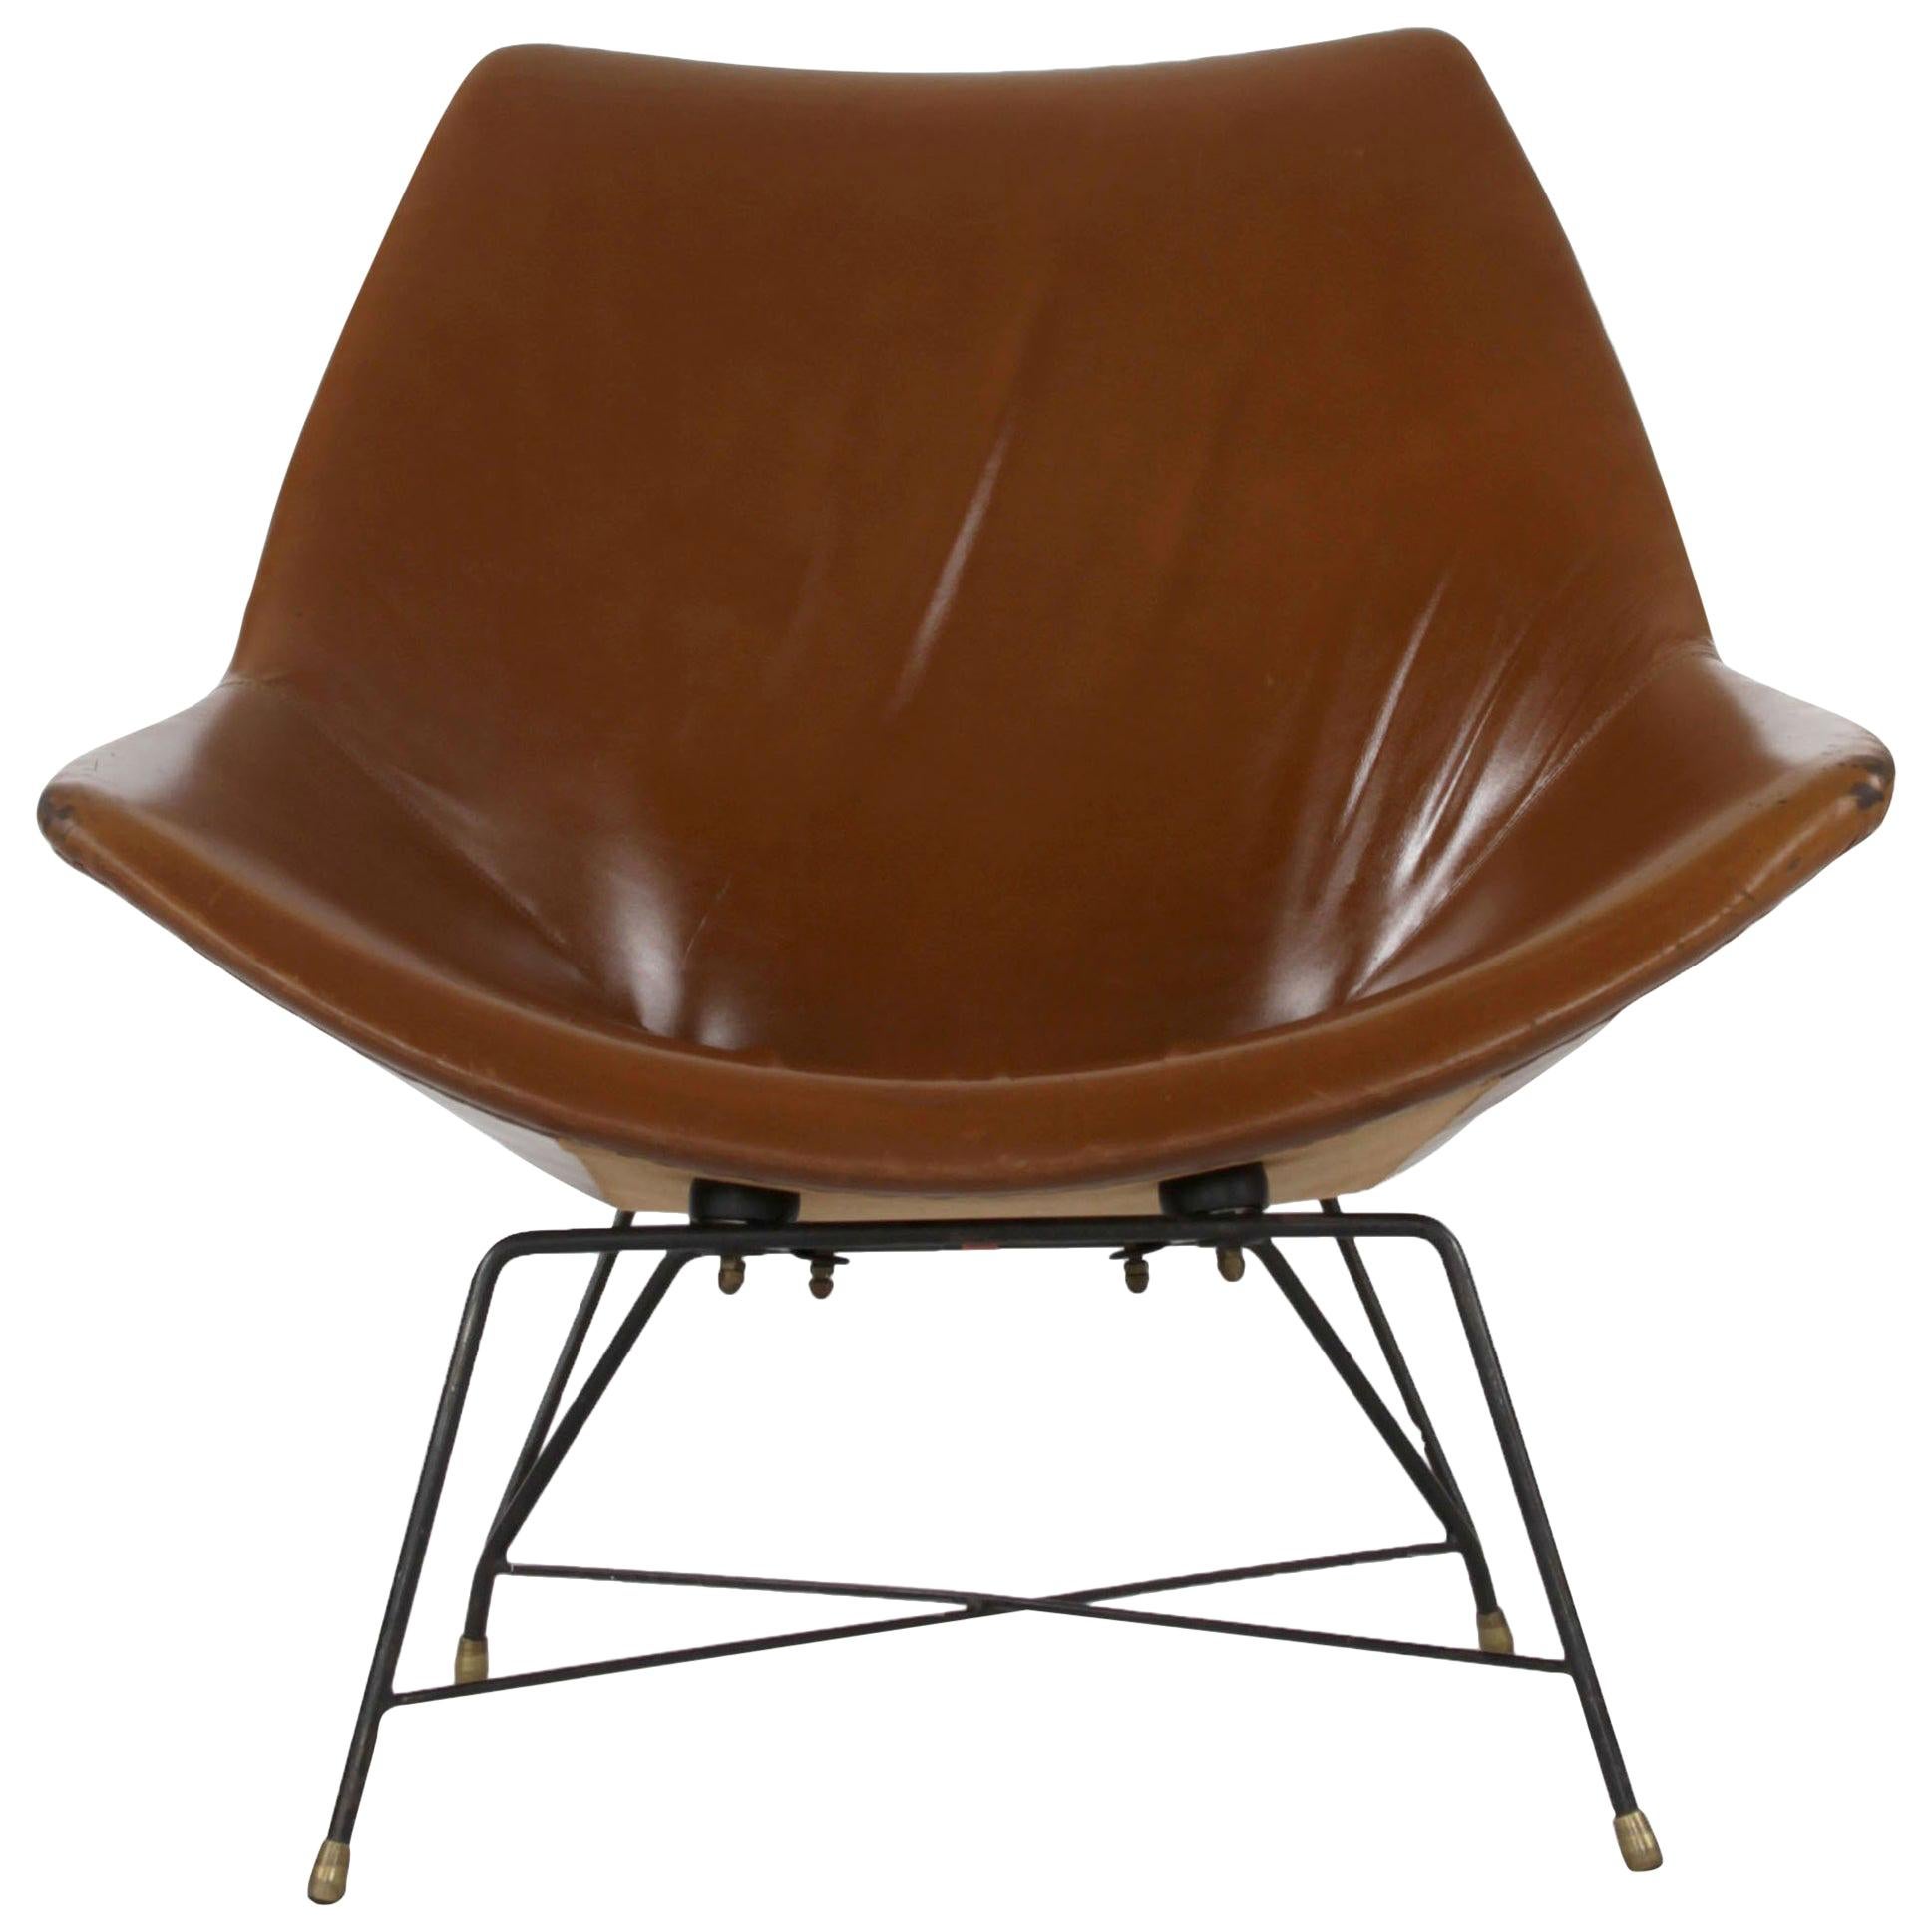 Italian Brown Leather Kosmos Chair Design by Augusto Bozzi for Saporiti, 1954 For Sale